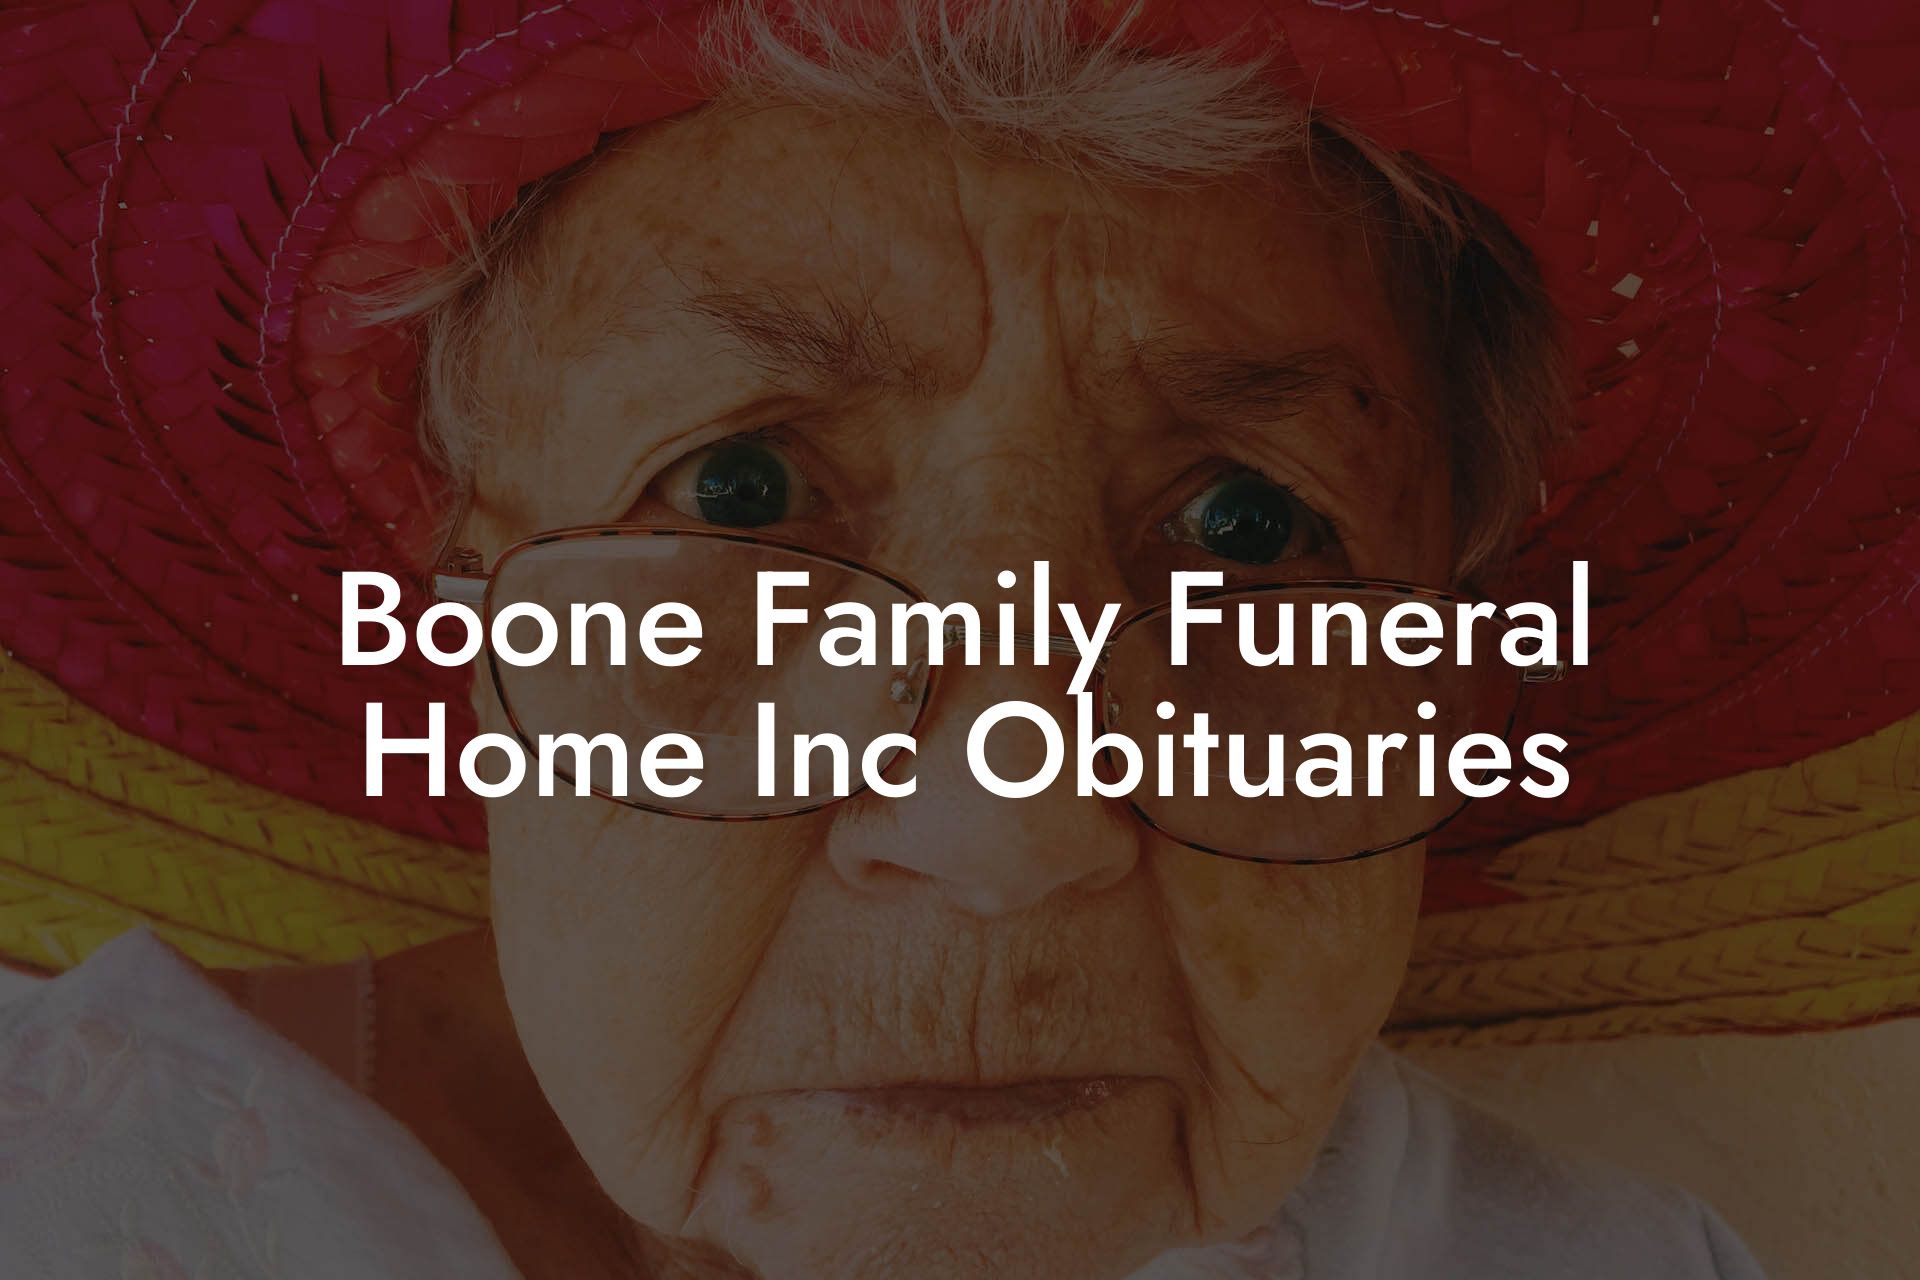 Boone Family Funeral Home Inc Obituaries